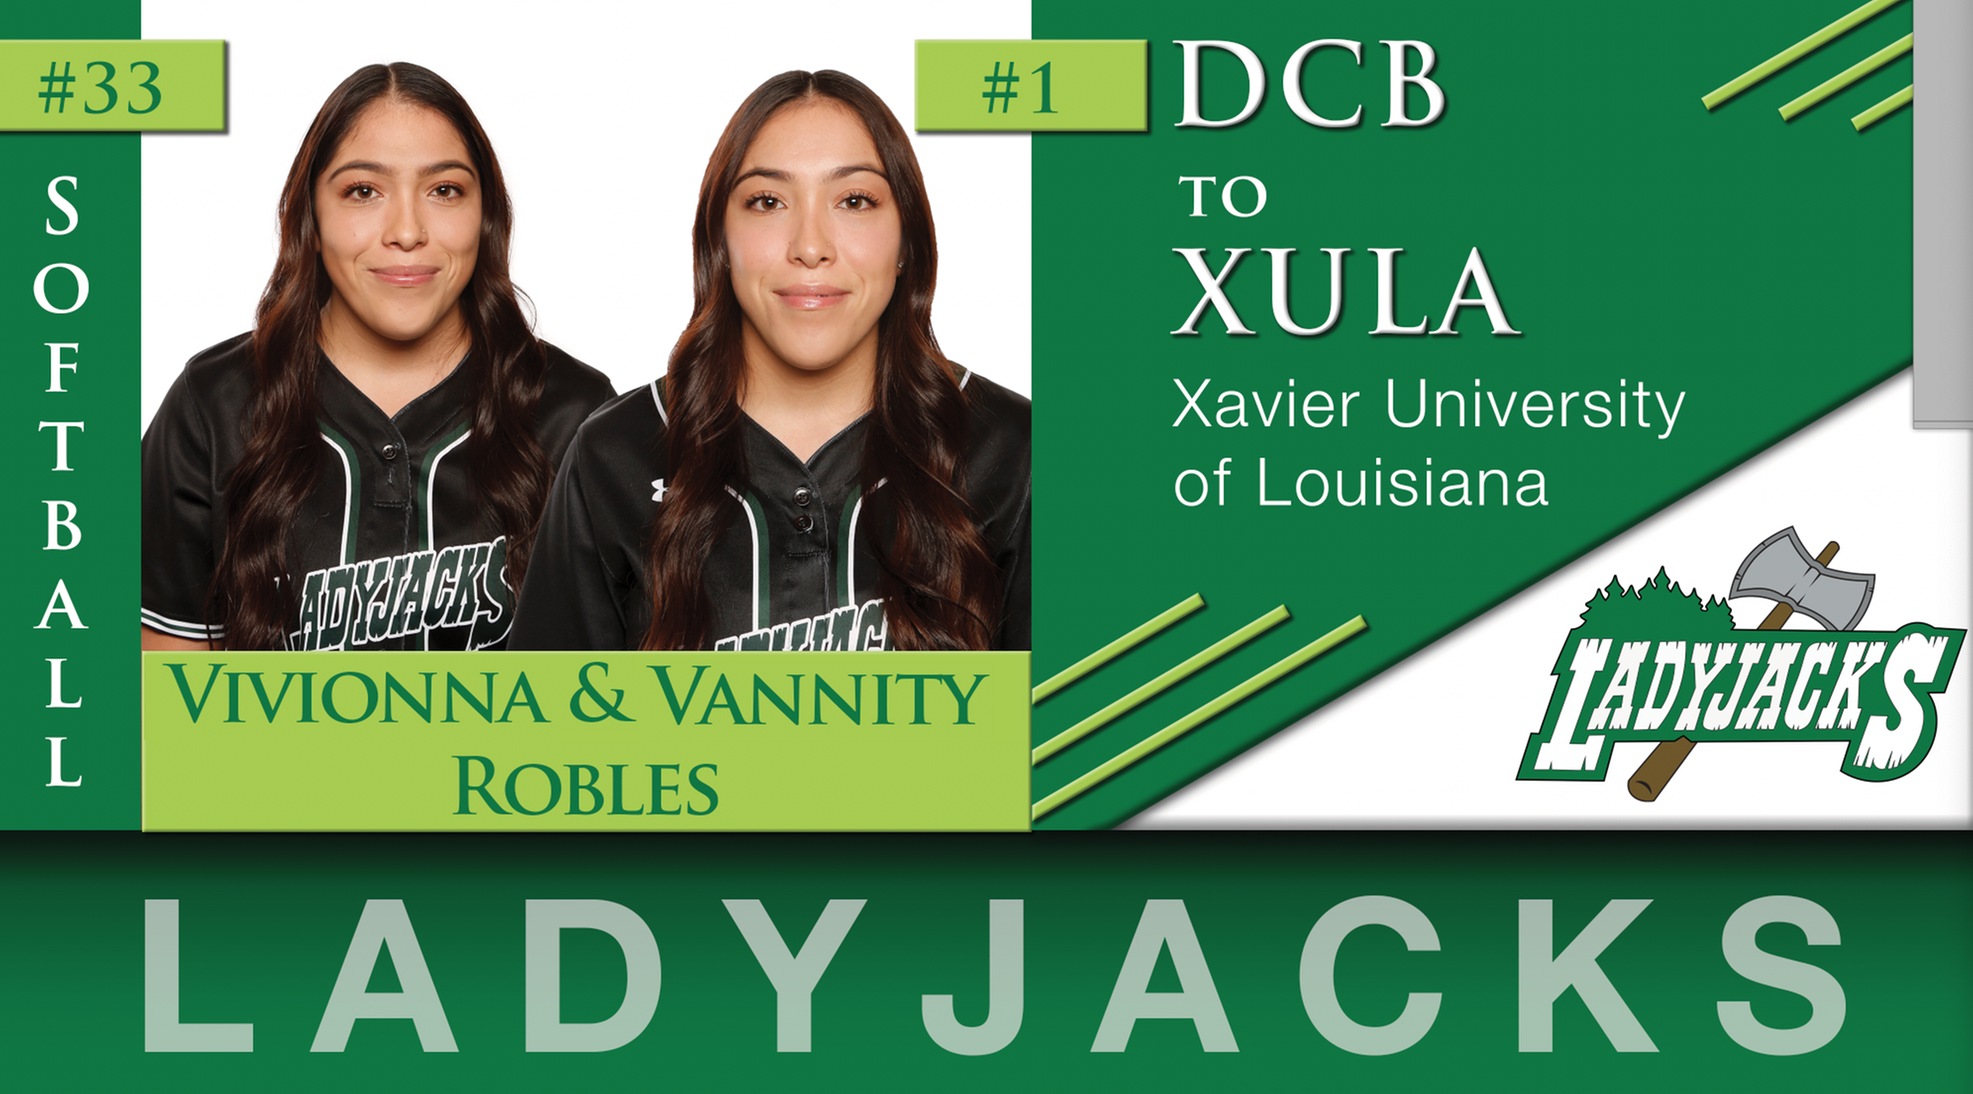 Robles Sisters Moving on to XULA